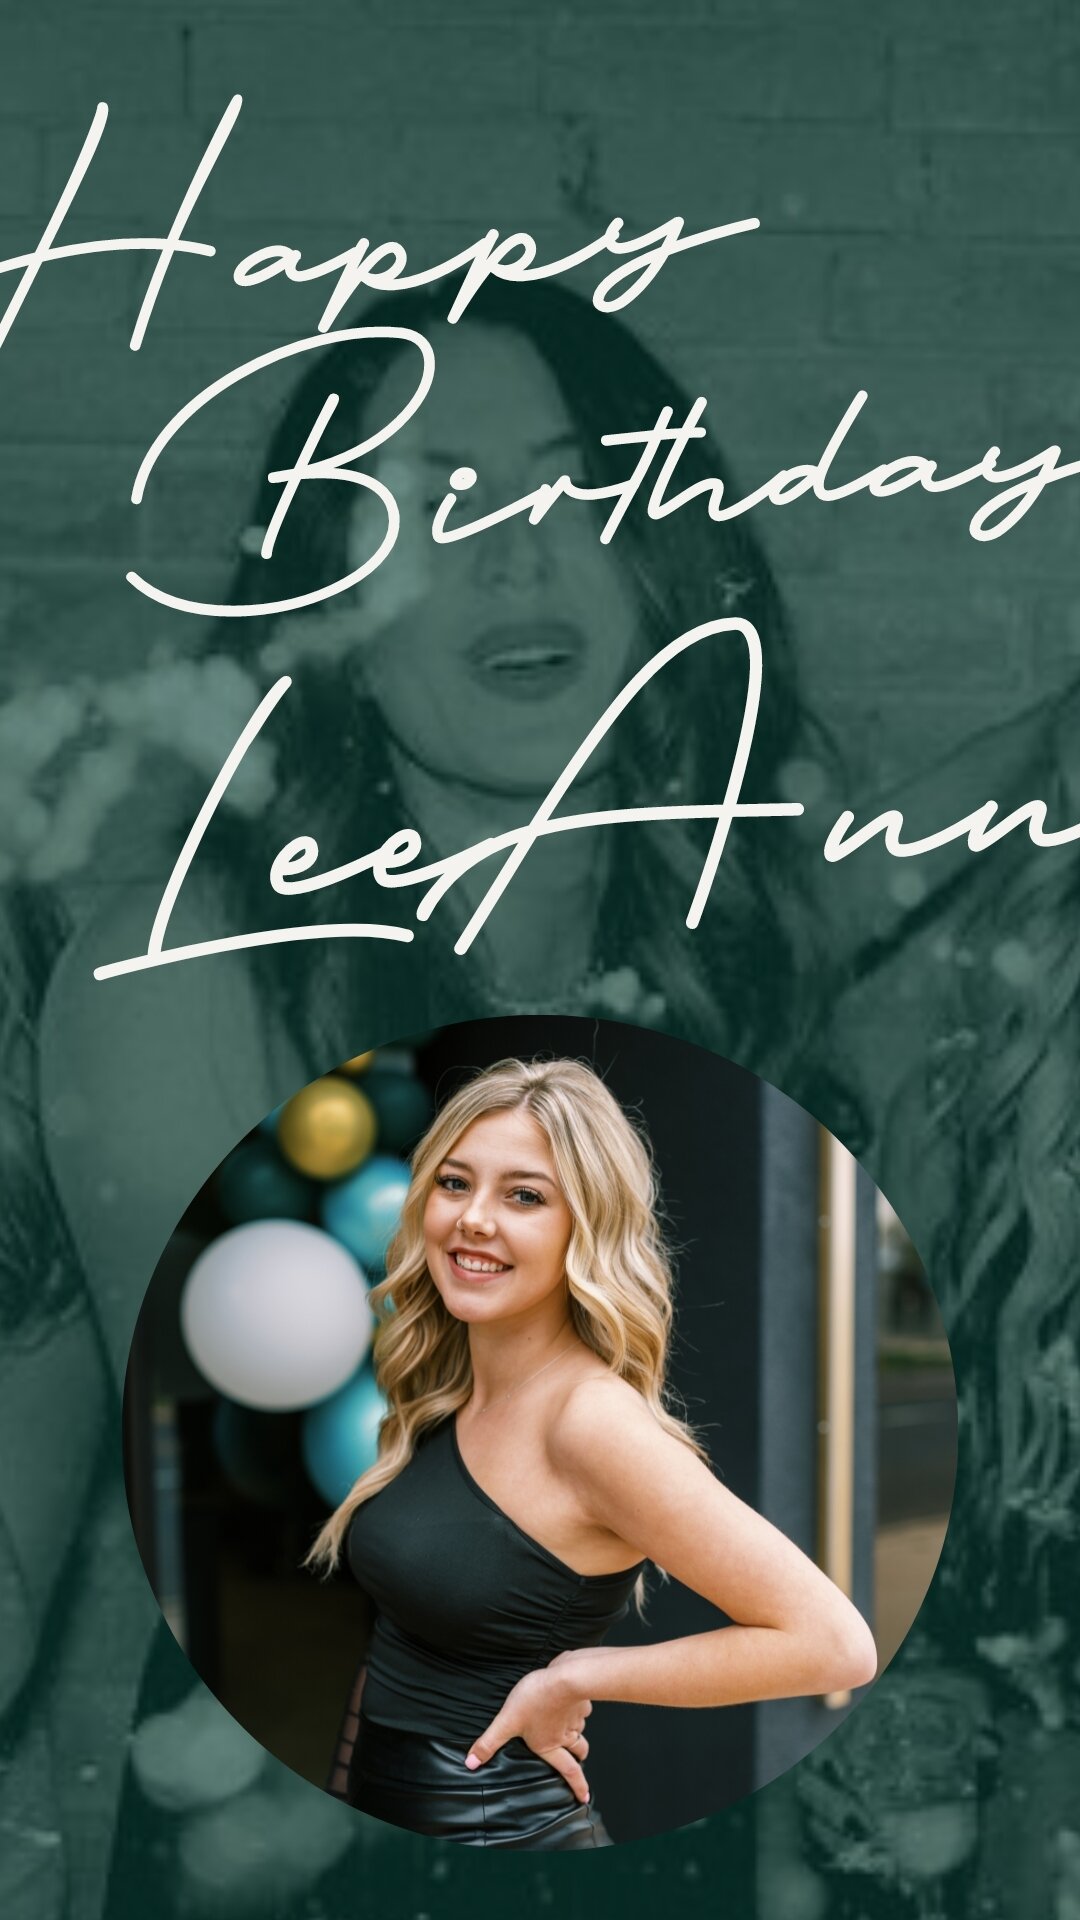 It's LeeAnn's Birthday month! Happy almost Birthday to this QUEEN!

#coloradohairextensions #hairextensionspecialist #hairextensionssalon #hairextensionscolorado #coloradospringshairstylist #salonbusiness #coloradospringssalon #salonbusiness #salonbi